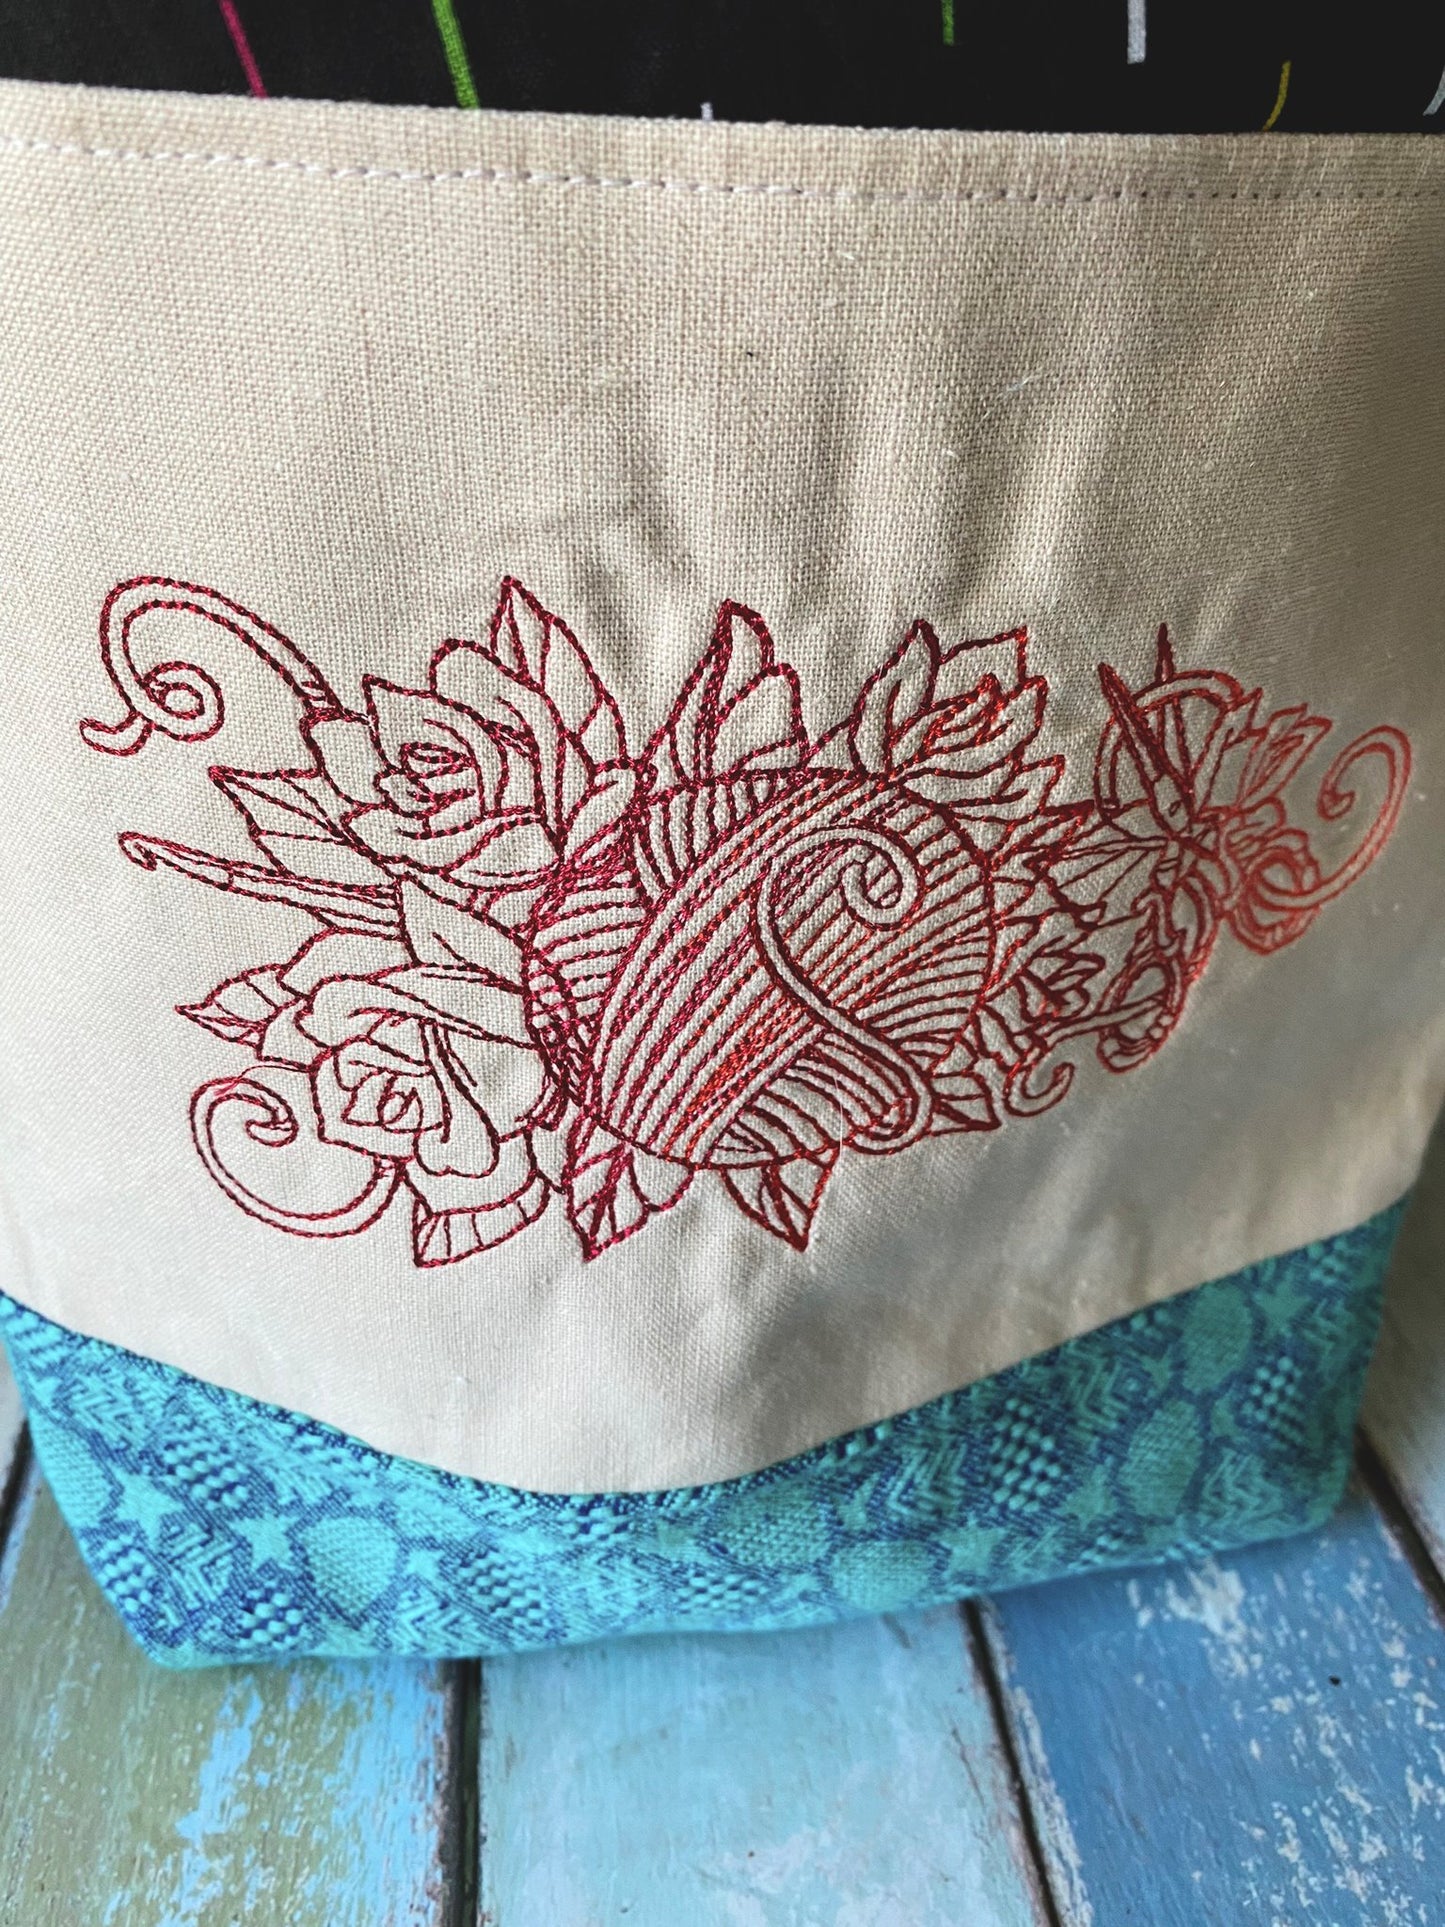 Crochet Forever and Sleeve Embroidery Medium Project Bag